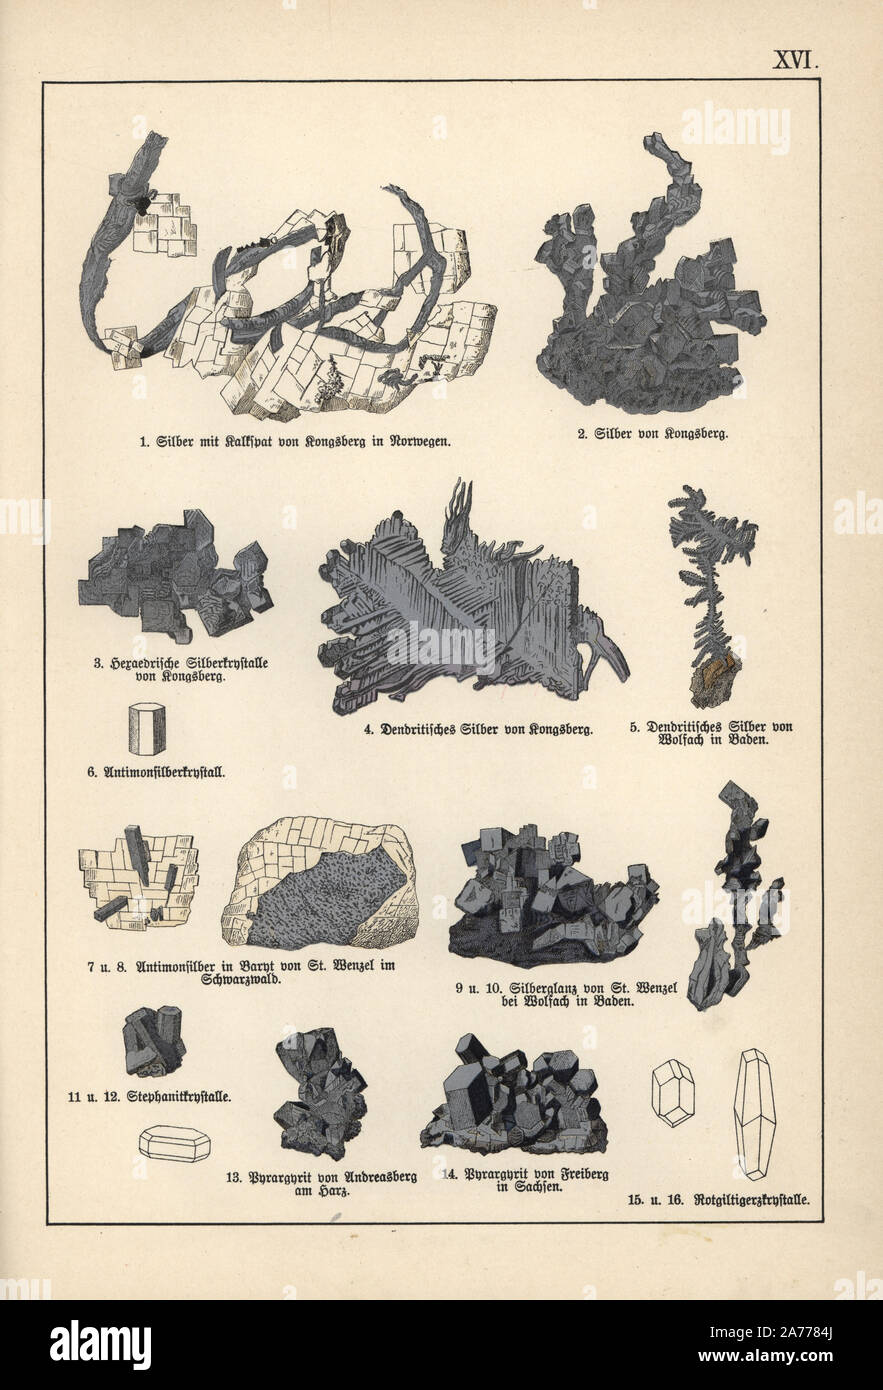 Precious metals including silver with calcite, silver with kongsbergite, hexahedral silver crystal, dendritic silver, antimony silver, argentite and pyrargyrite. Chromolithograph from Dr. Aldolph Kenngott's 'Mineralogy' section in Gotthilf Heinrich von Schubert's 'Naturgeschichte,' Schreiber, Munich, 1886. Stock Photo